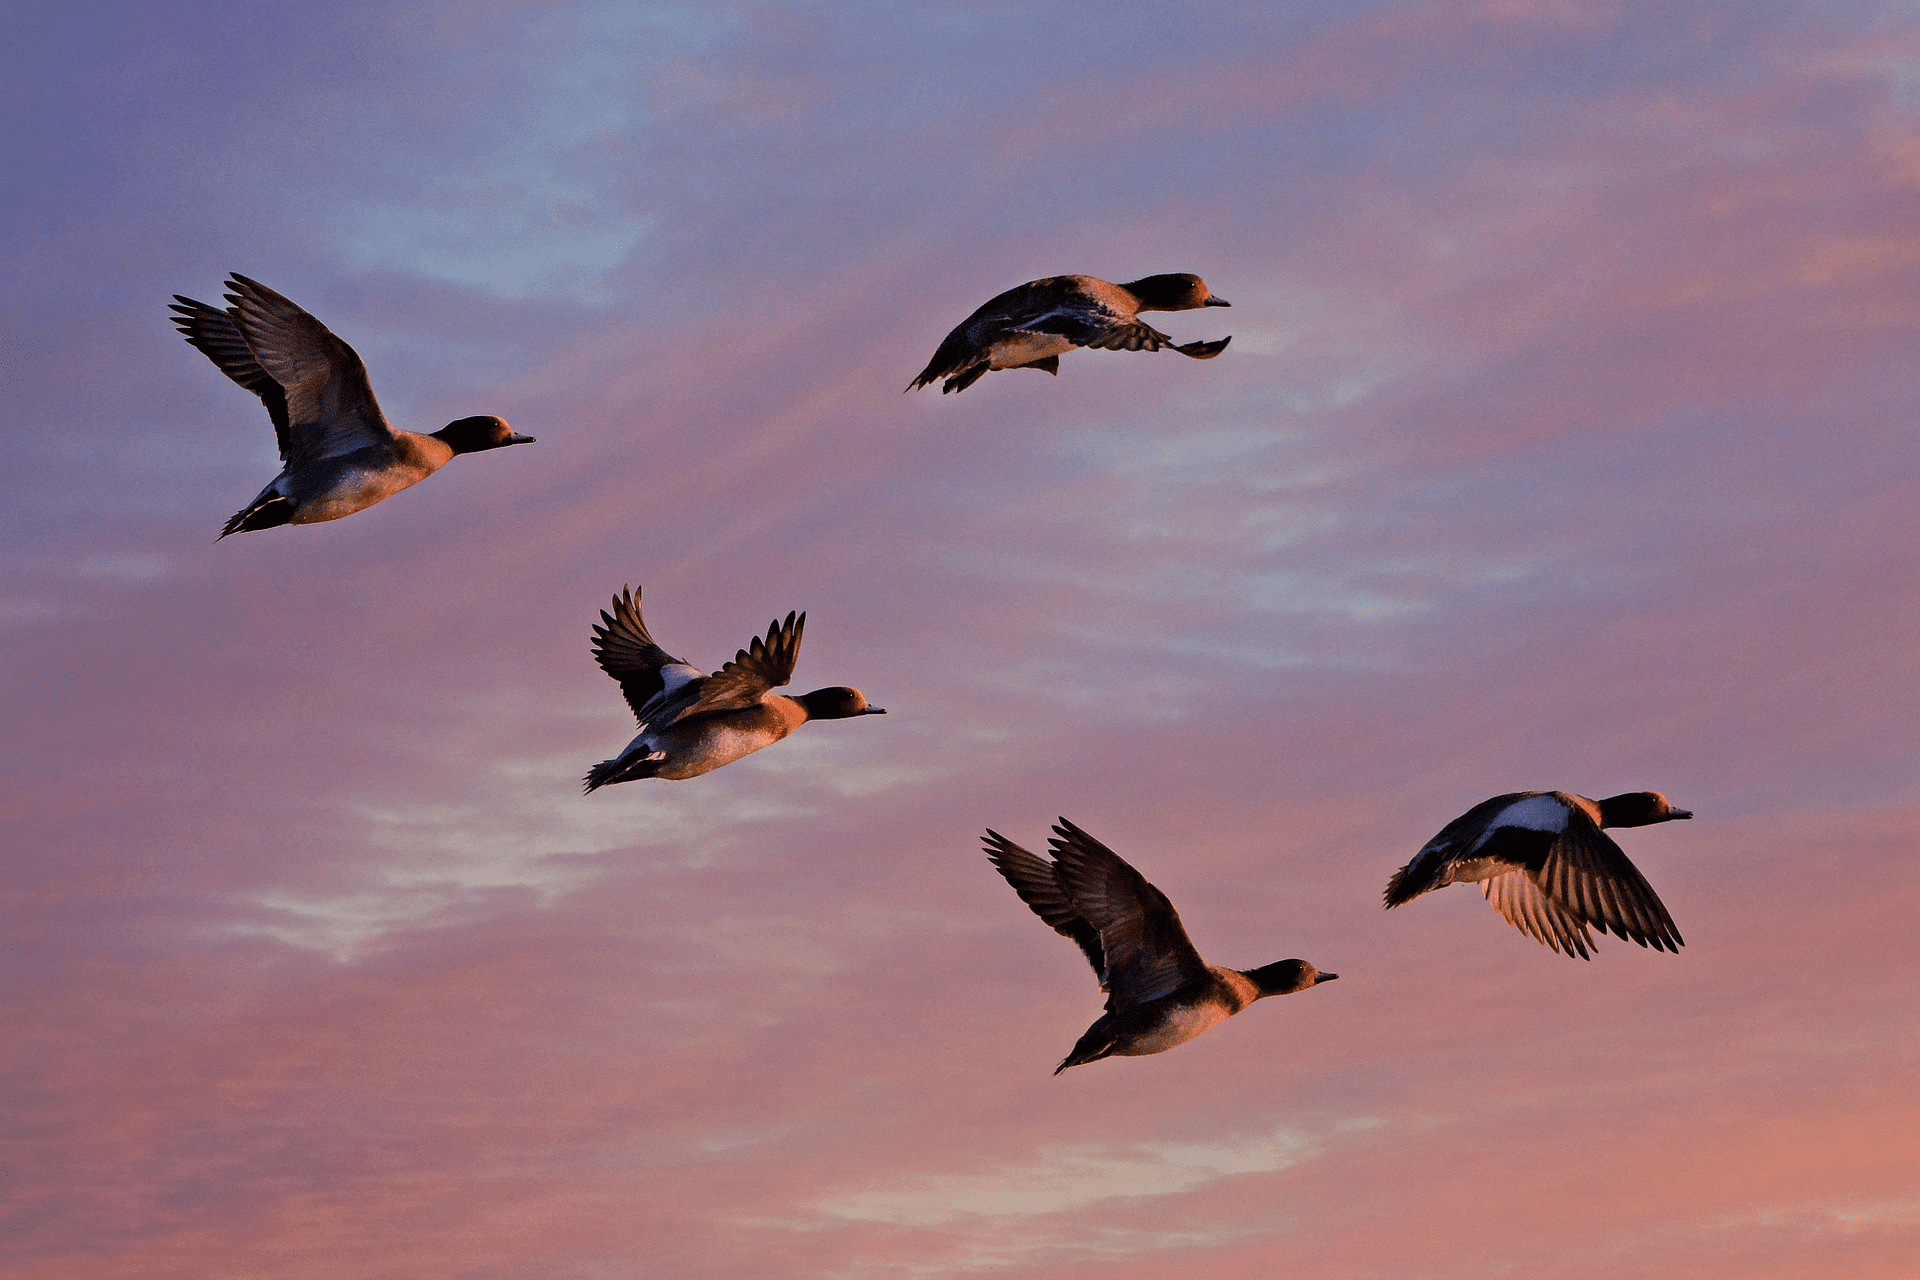 Mike hoped that money would fall from the sky, not ducks! | Photo: Pixabay/ Mabel Amber